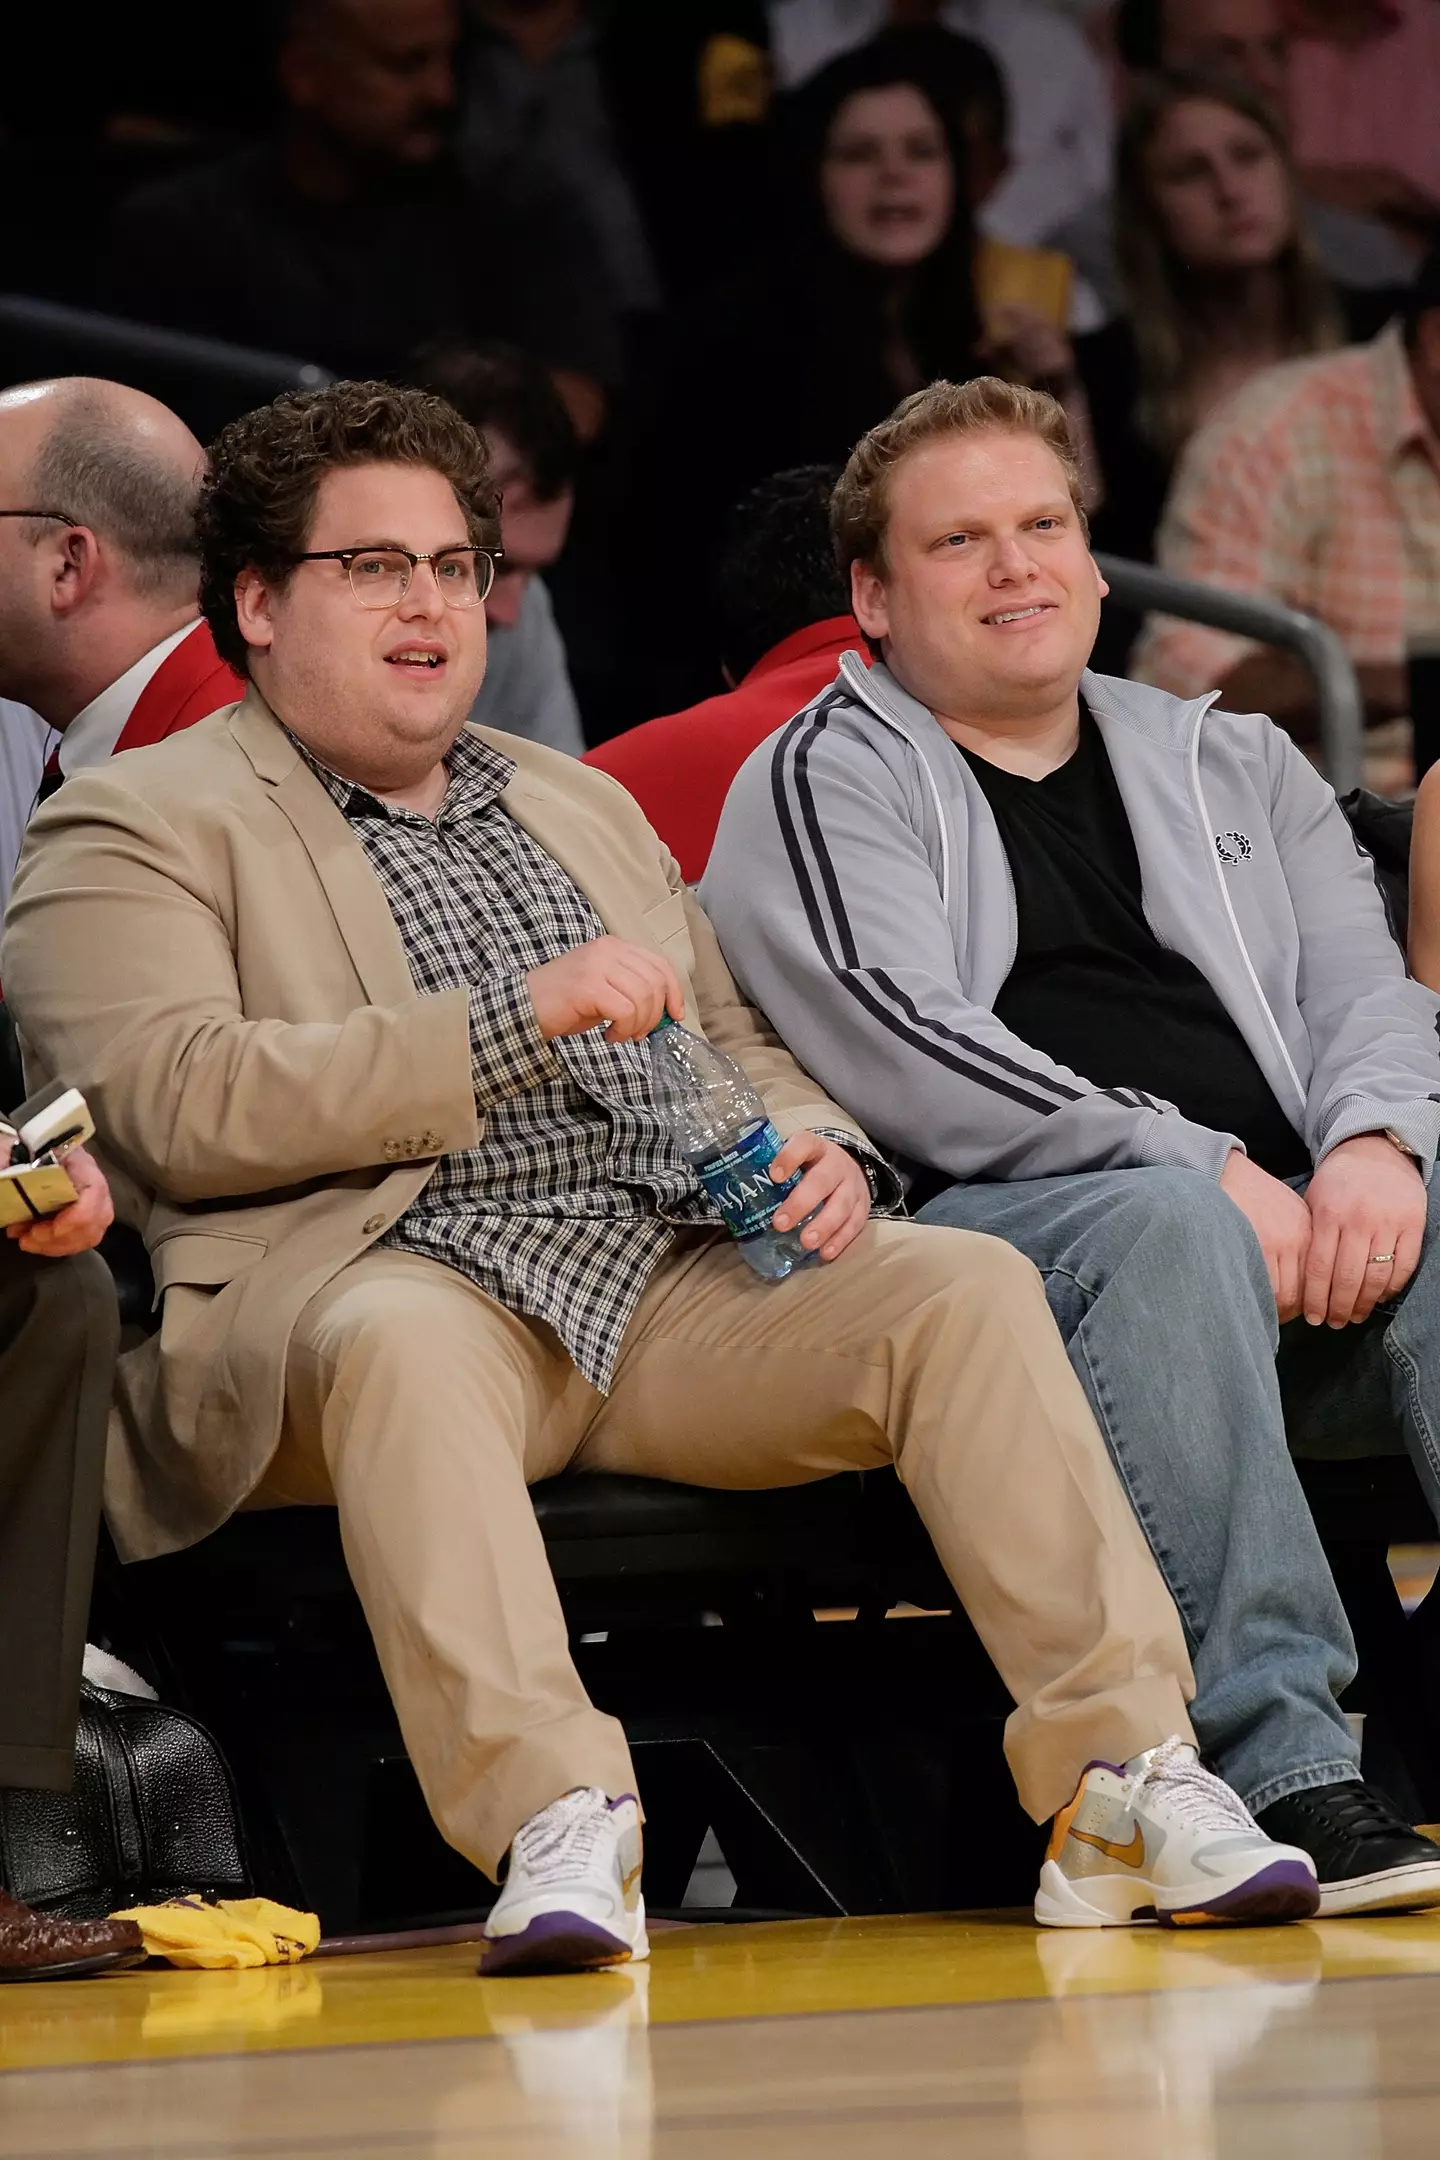 The photo of Jonah Hill and his brother, Jordan Feldstein, at the Los Angeles Lakers basketball match.